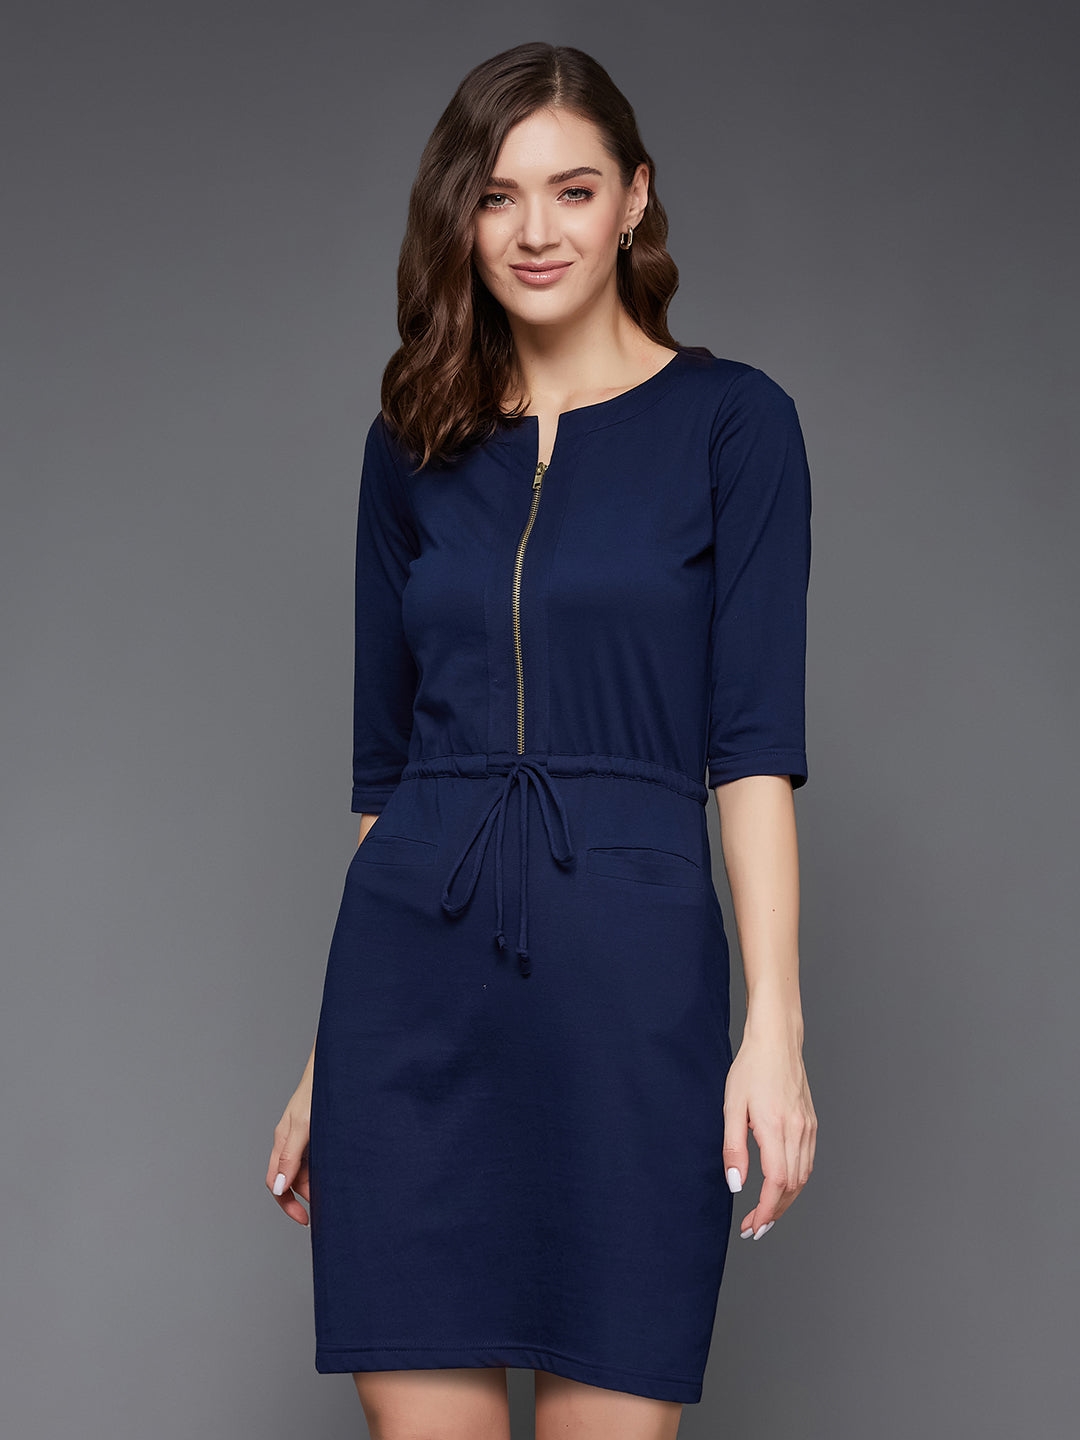 Navy Blue Round Neck 3/4 Sleeves Cotton Solid Mini Shift Dress